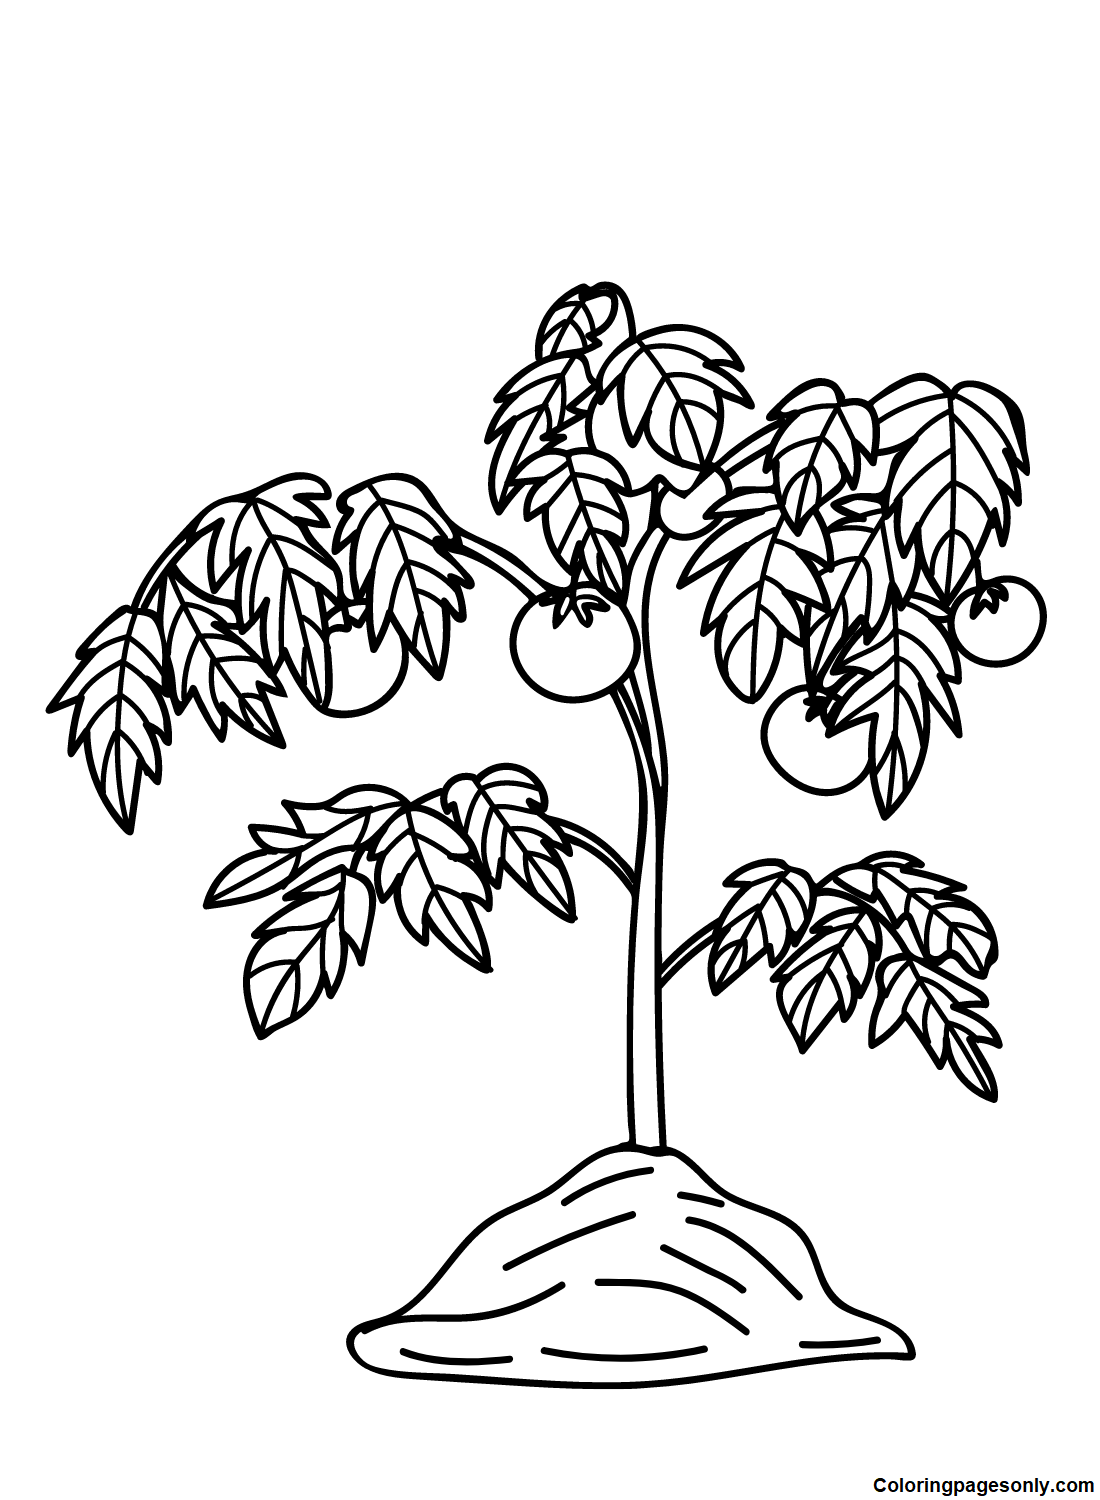 Tomato Plant Coloring Pages